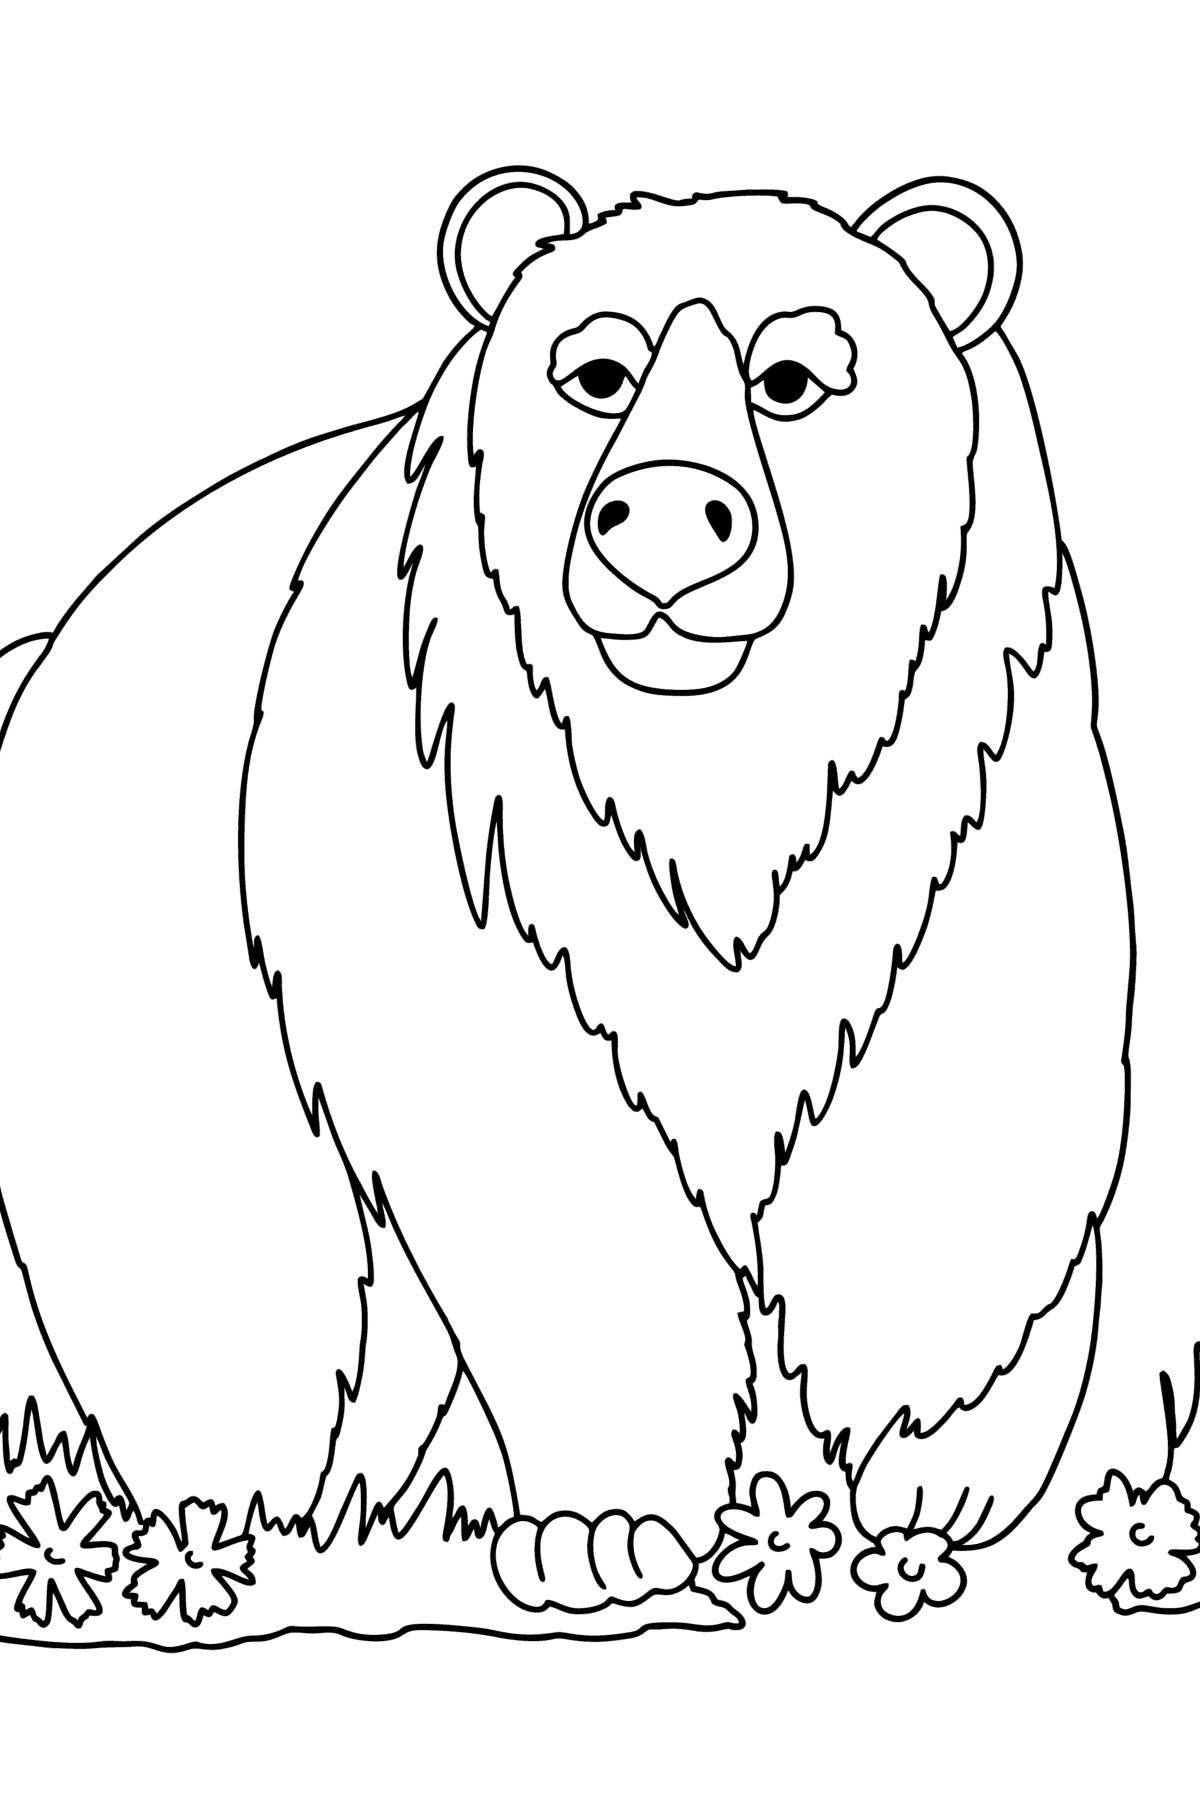 Crazy brown bear coloring book for kids